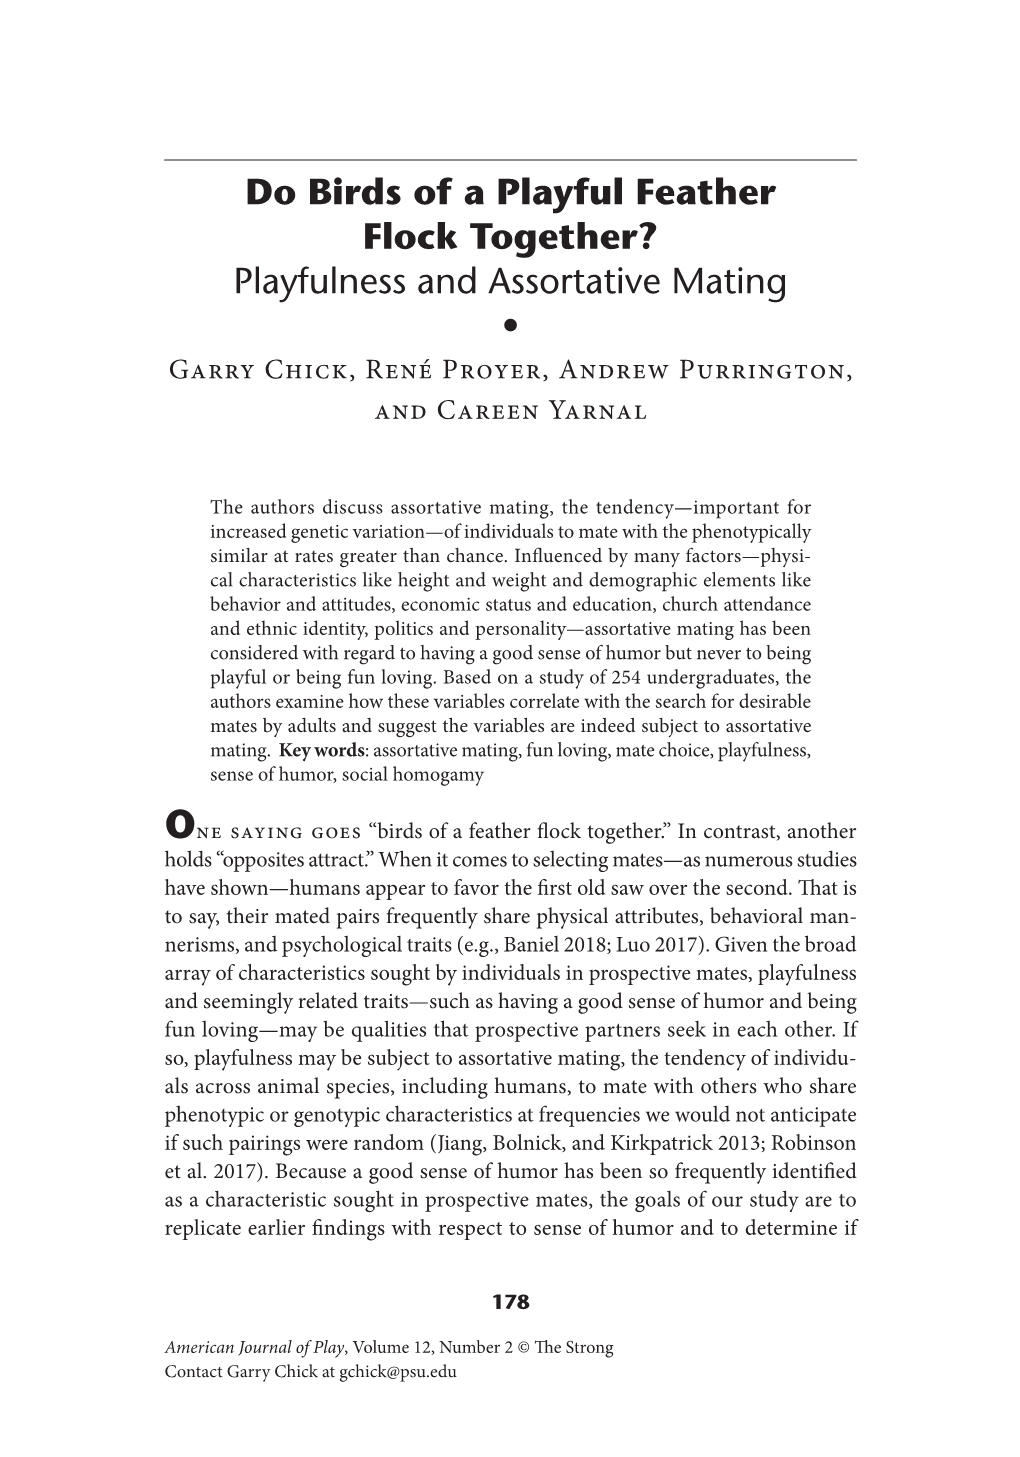 Do Birds of a Playful Feather Flock Together? Playfulness and Assortative Mating • Garry Chick, René Proyer, Andrew Purrington, and Careen Yarnal